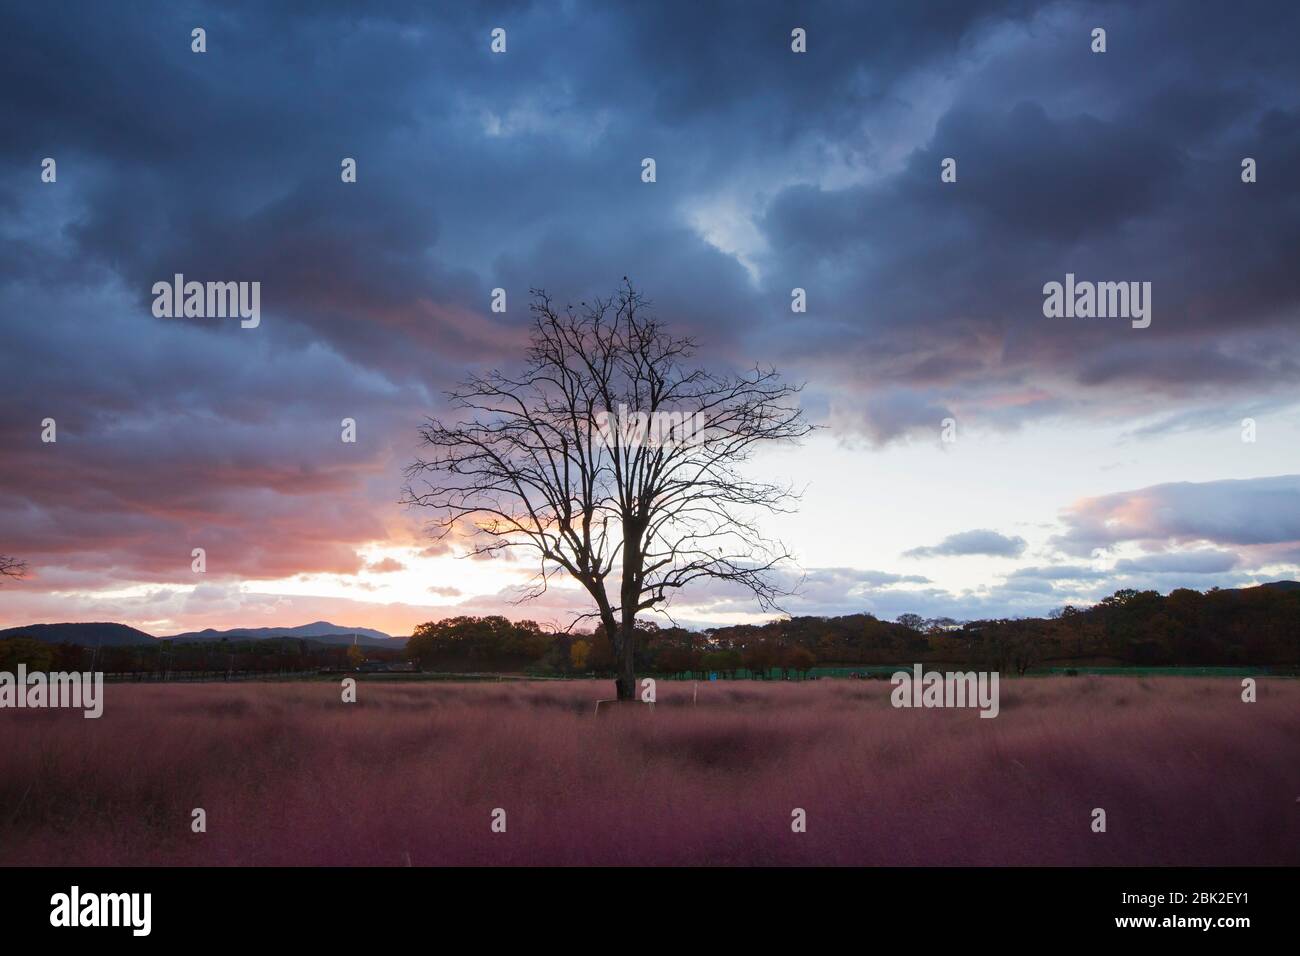 beautiful sunrising landscape with a tree in the pink muhly grass field on autumn, Gyeongju, Korea Stock Photo